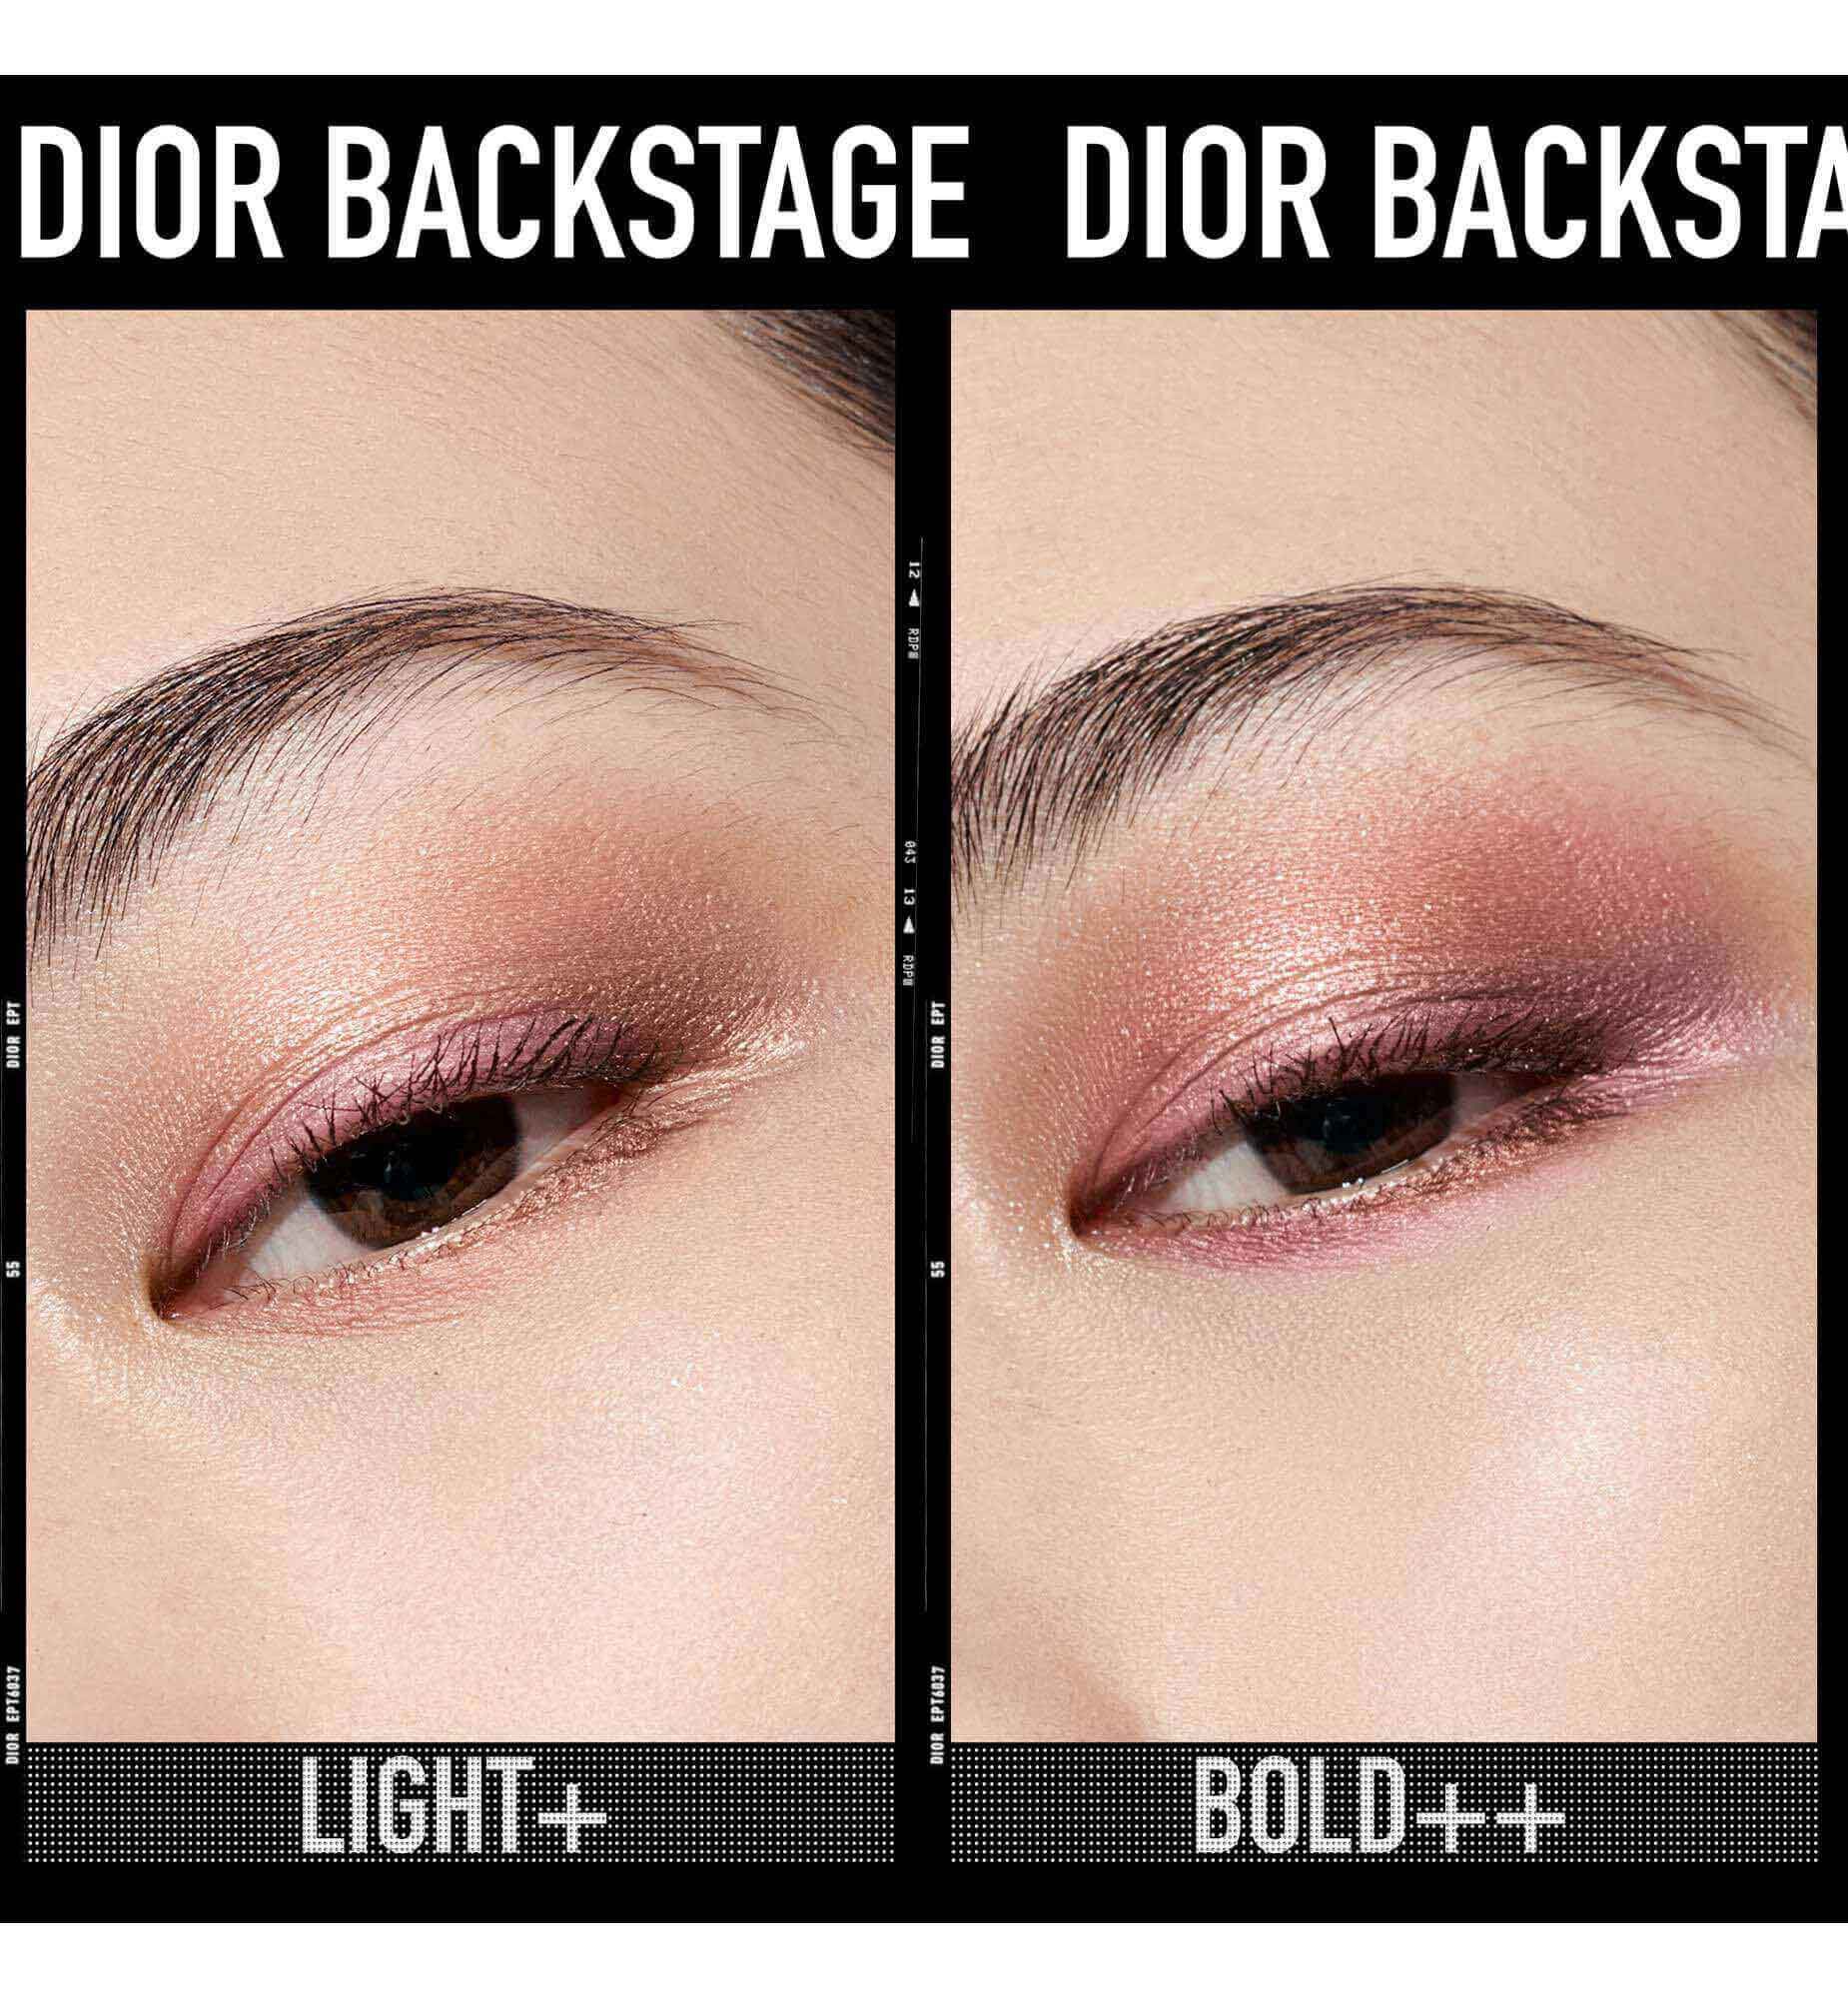 Dior Eye Reviver Backstage Pros Illuminating Neutrals Eye Palette  Nordy  Girl  The Beauty Look Book